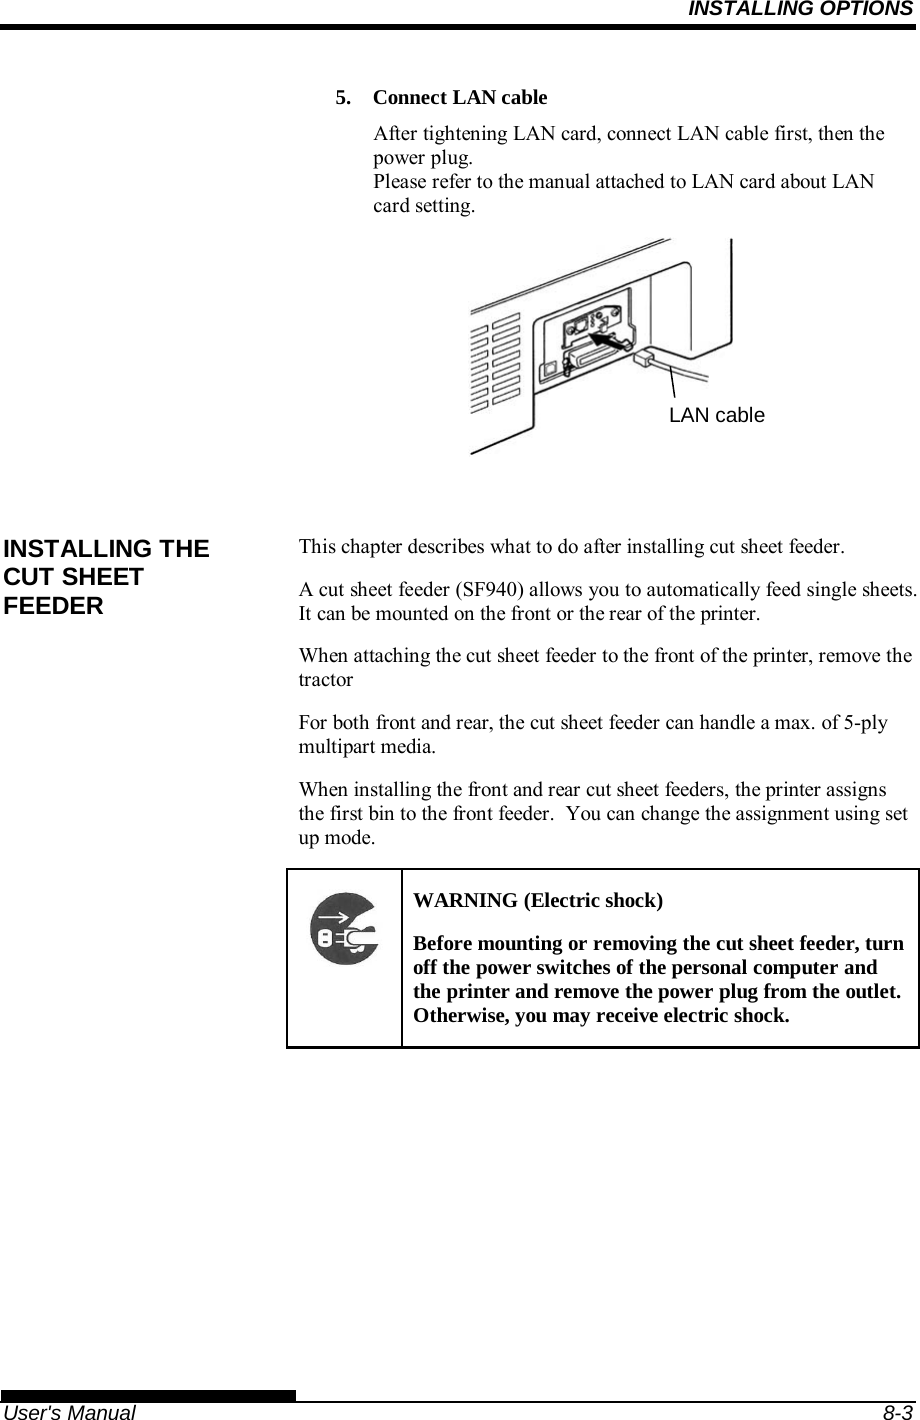 INSTALLING OPTIONS   User&apos;s Manual  8-3 5. Connect LAN cable After tightening LAN card, connect LAN cable first, then the power plug. Please refer to the manual attached to LAN card about LAN card setting.          This chapter describes what to do after installing cut sheet feeder. A cut sheet feeder (SF940) allows you to automatically feed single sheets.  It can be mounted on the front or the rear of the printer. When attaching the cut sheet feeder to the front of the printer, remove the tractor  For both front and rear, the cut sheet feeder can handle a max. of 5-ply multipart media. When installing the front and rear cut sheet feeders, the printer assigns the first bin to the front feeder.  You can change the assignment using set up mode. WARNING (Electric shock) Before mounting or removing the cut sheet feeder, turn off the power switches of the personal computer and the printer and remove the power plug from the outlet.  Otherwise, you may receive electric shock.  INSTALLING THE CUT SHEET FEEDER LAN cable 